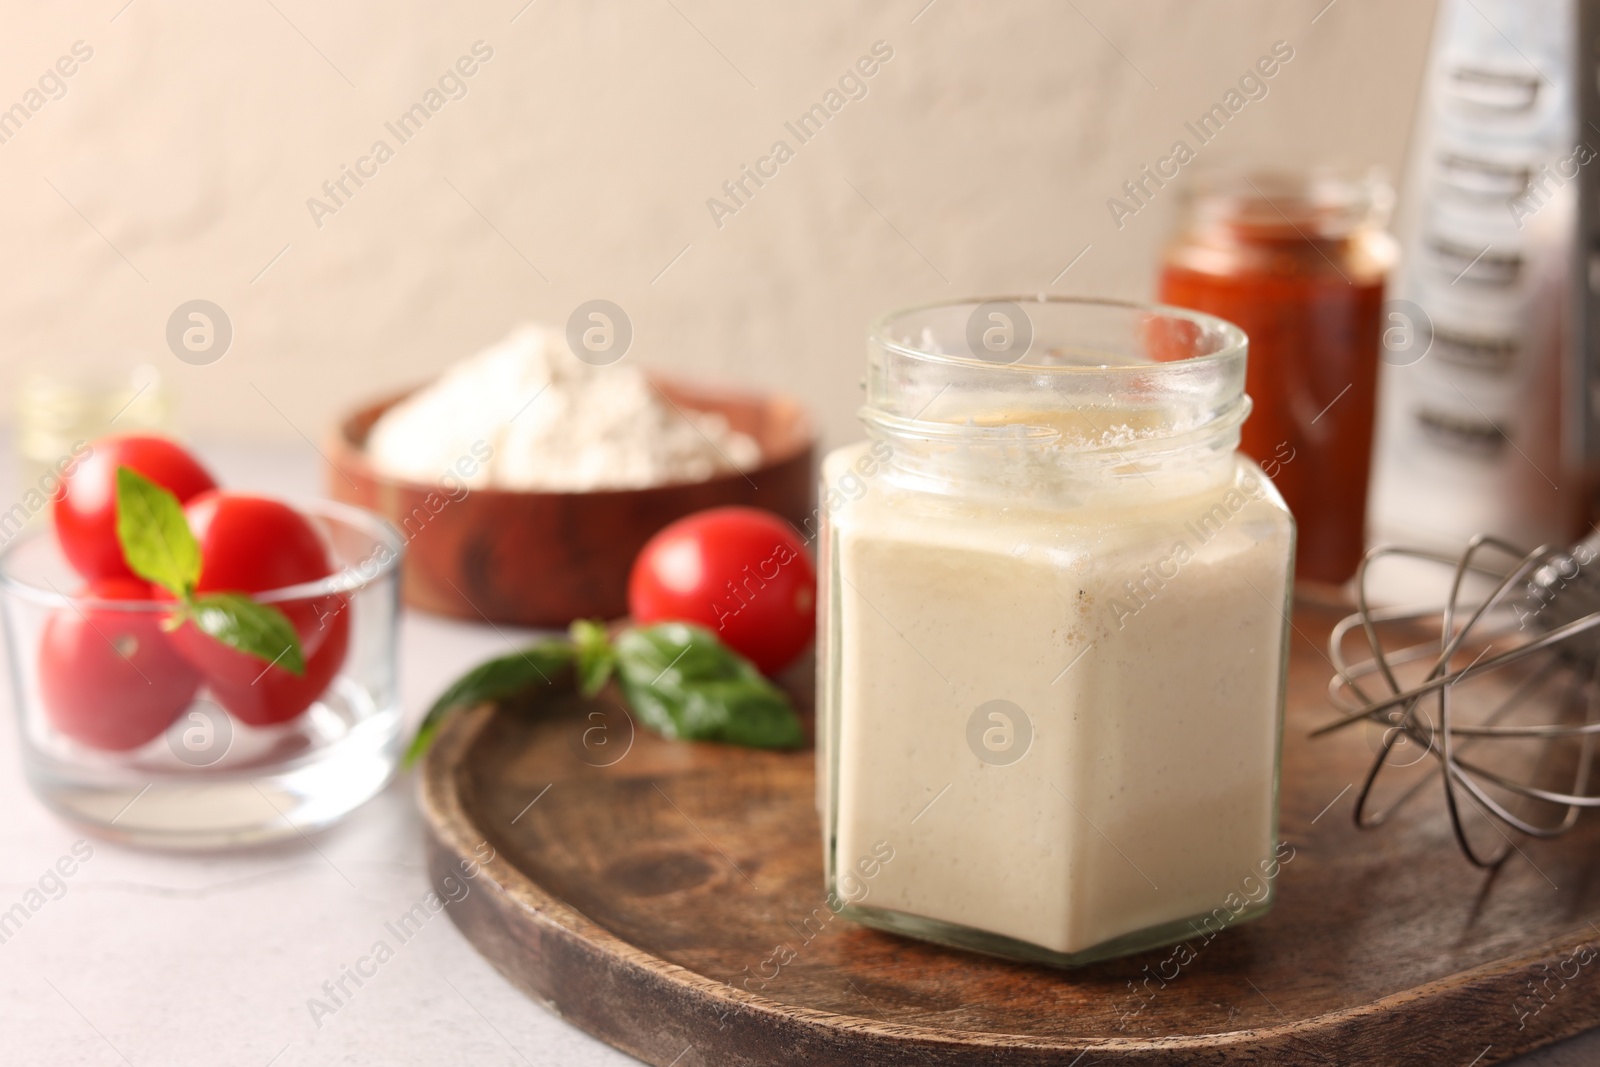 Photo of Pizza dough starter in glass jar, products and whisk on gray table